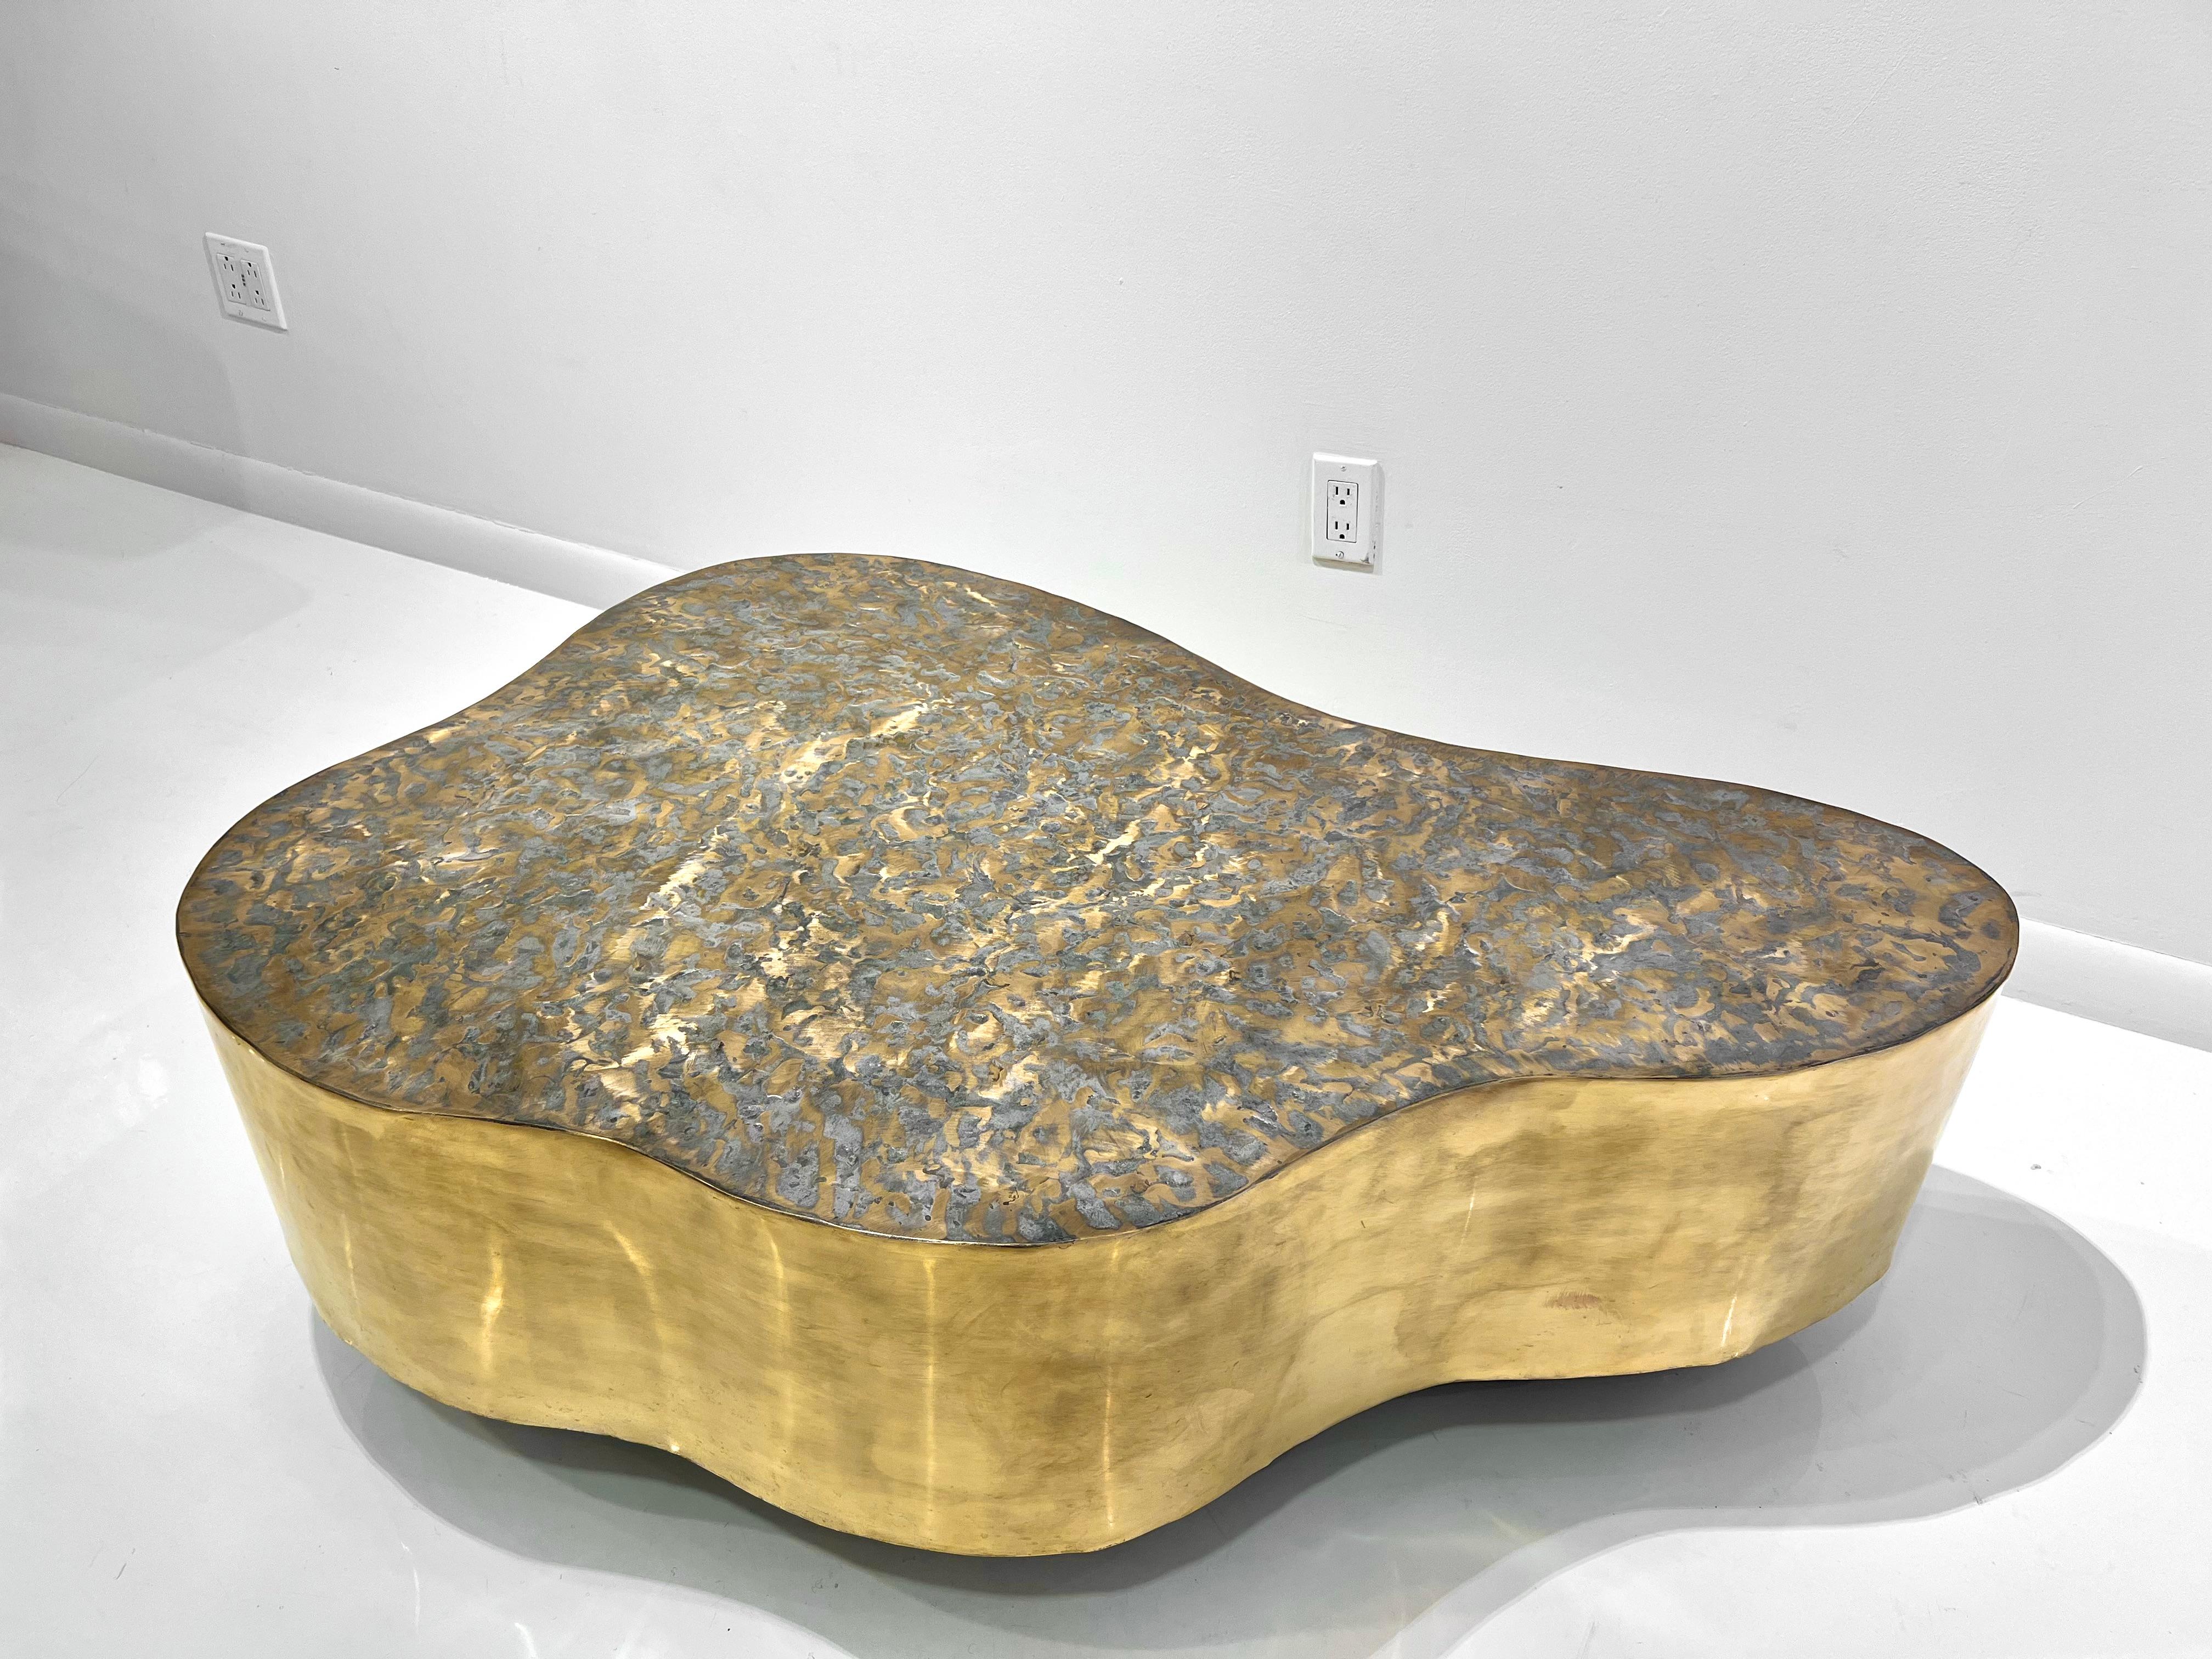 Rare 1960's Bronze Biomorphic Coffee Table by Silas Seandel, patinated with brushed textured top.  This is a larger SINGLE table from a two- part set. The table is on hidden casters and can be moved with ease.

Approx Dimensions: 45